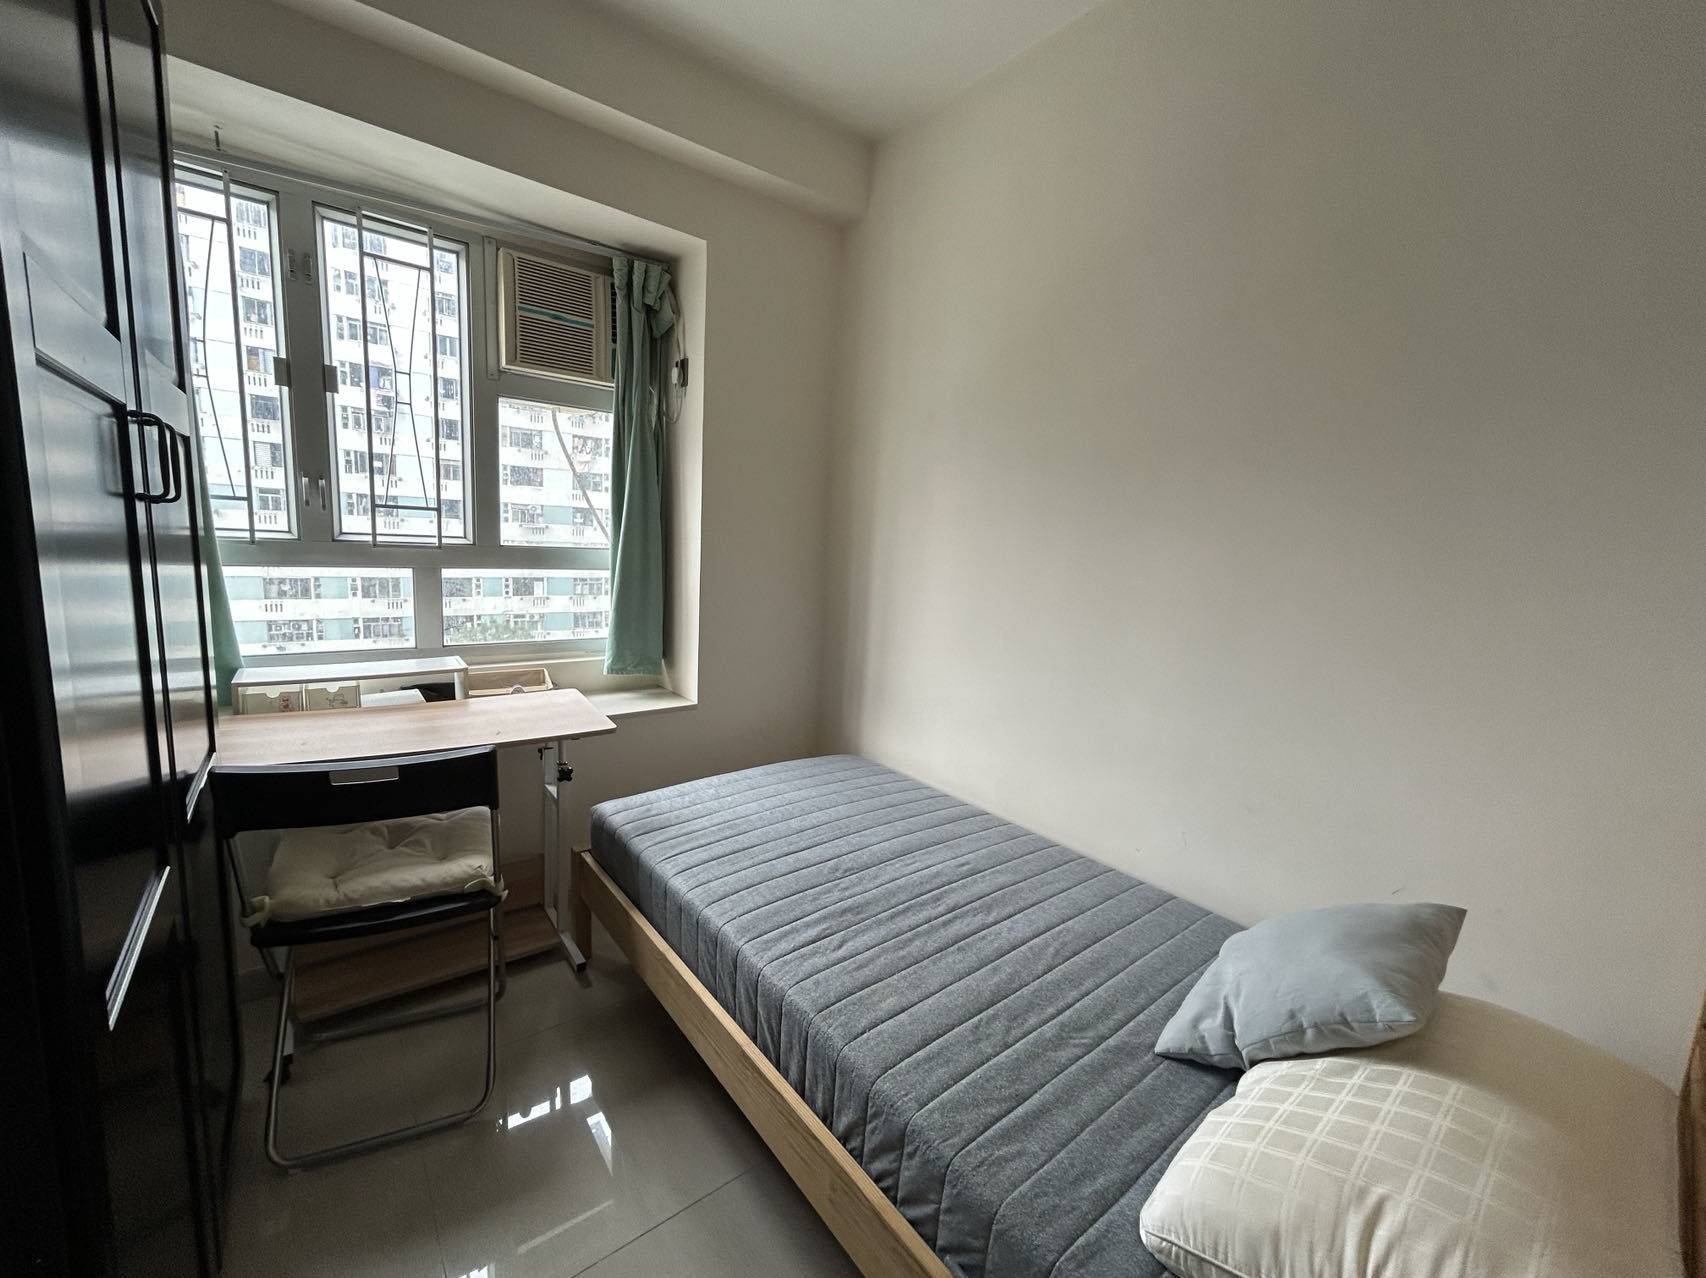 Hong Kong-New Territories-Cozy Home,Clean&Comfy,No Gender Limit,Hustle & Bustle